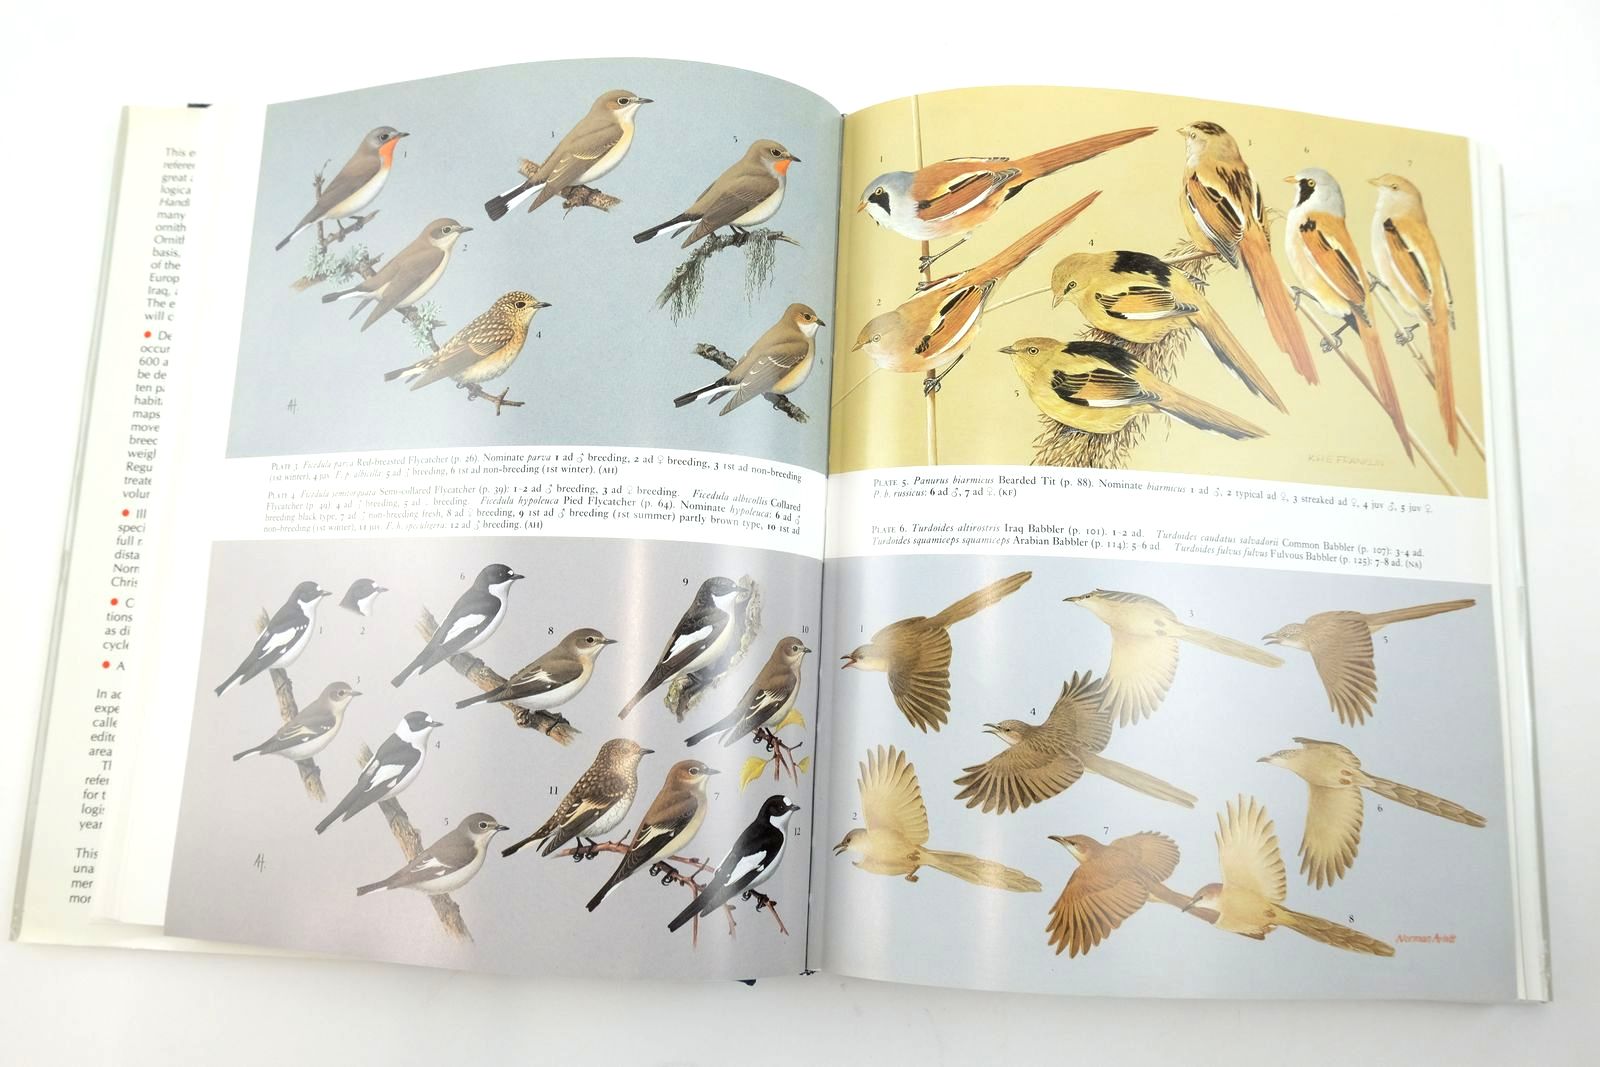 Photo of HANDBOOK OF THE BIRDS OF EUROPE THE MIDDLE EAST AND NORTH AFRICA VOLUME VII FLYCATCHERS TO SHRIKES written by Cramp, Stanley
et al,  published by Oxford University Press (STOCK CODE: 2139595)  for sale by Stella & Rose's Books